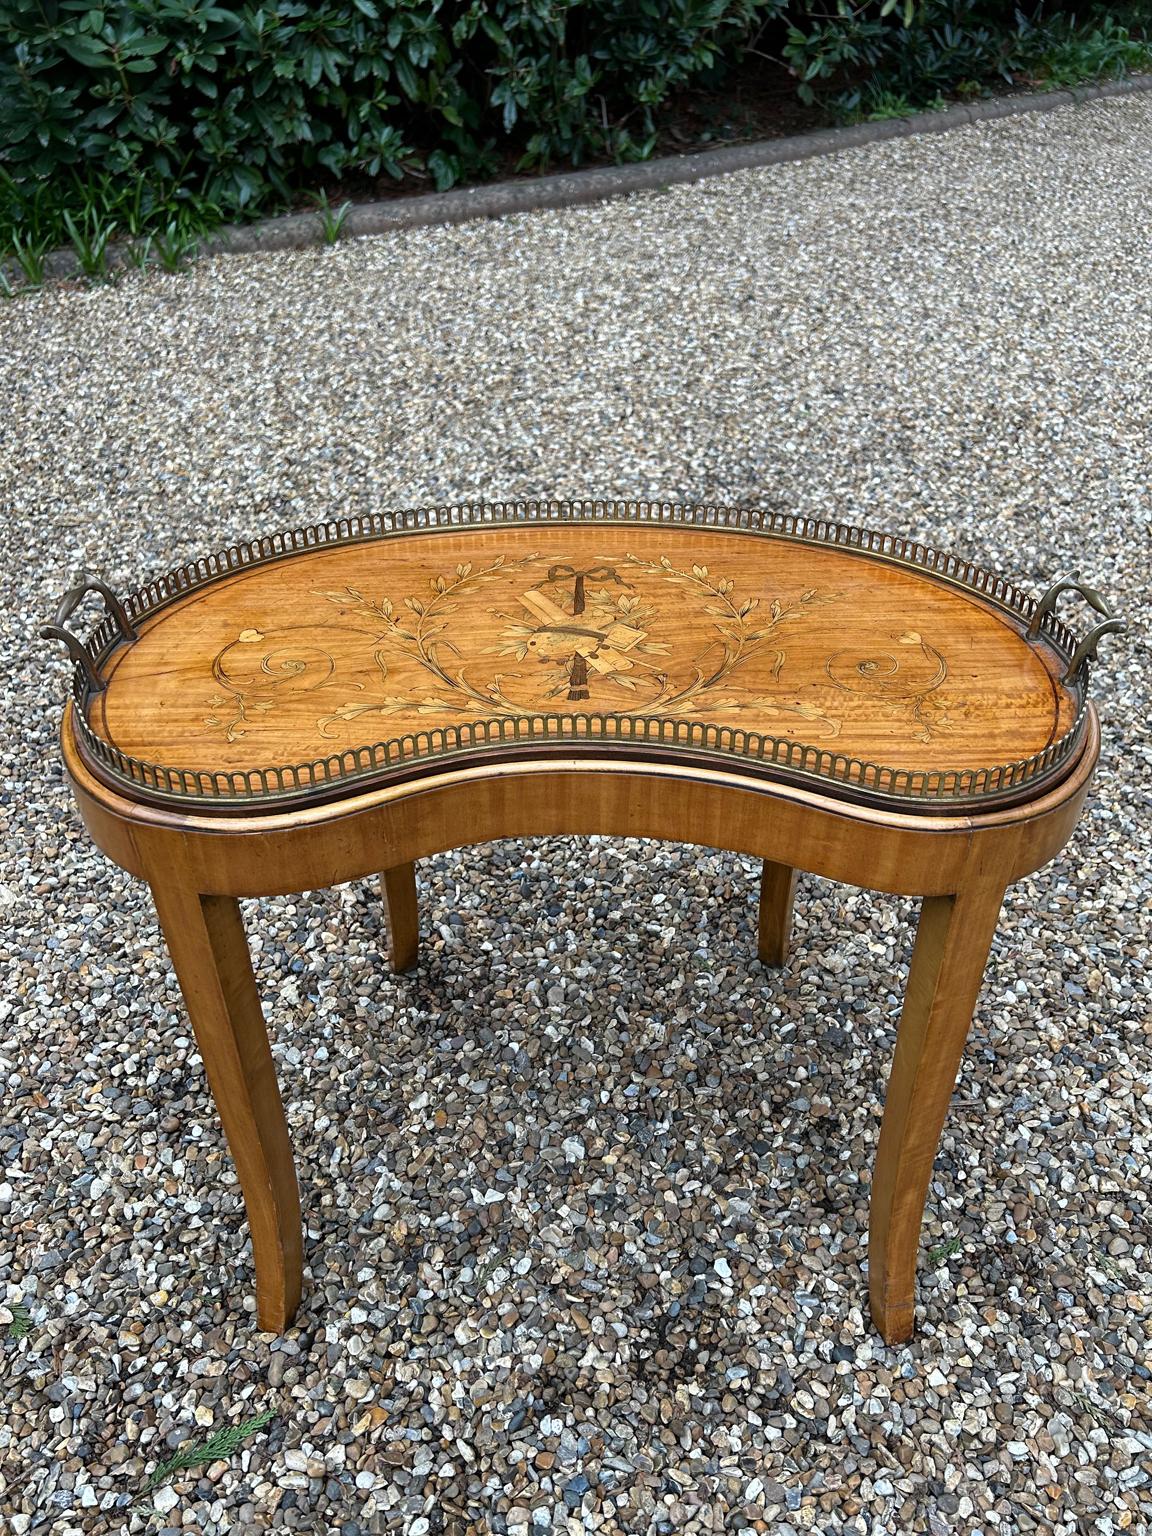 19th Century Satinwood Kidney Shaped Inlaid Tray on stand. The inlay shows ribbons, bows, scrolls, garlands of flowers. Around the edge there is a brass gallery & carrying handles. The tray stands on a removable later stand.

Circa: 1890 /